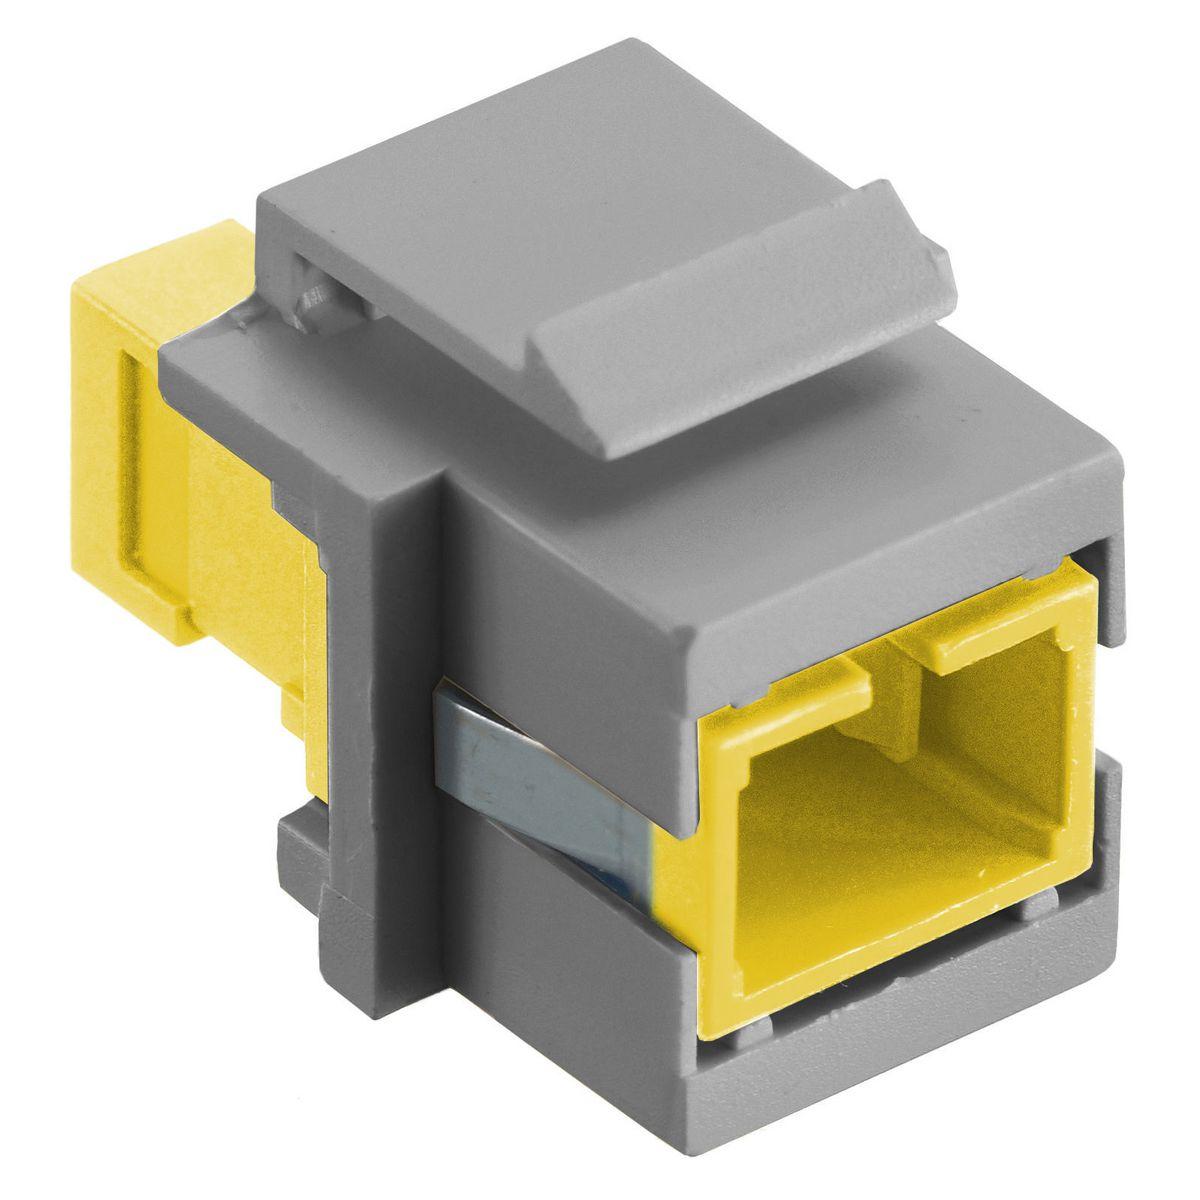 Hubbell SFFSCSYG Fiber Optic Connectors, Snap-Fit,Flush, SC Simplex, Zircon Sleeves, Yellow, Gray Housing  ; Snap Fit ; Gray Housing ; Flush ; SC Simplex ; Yellow Adapter ; Standard Product